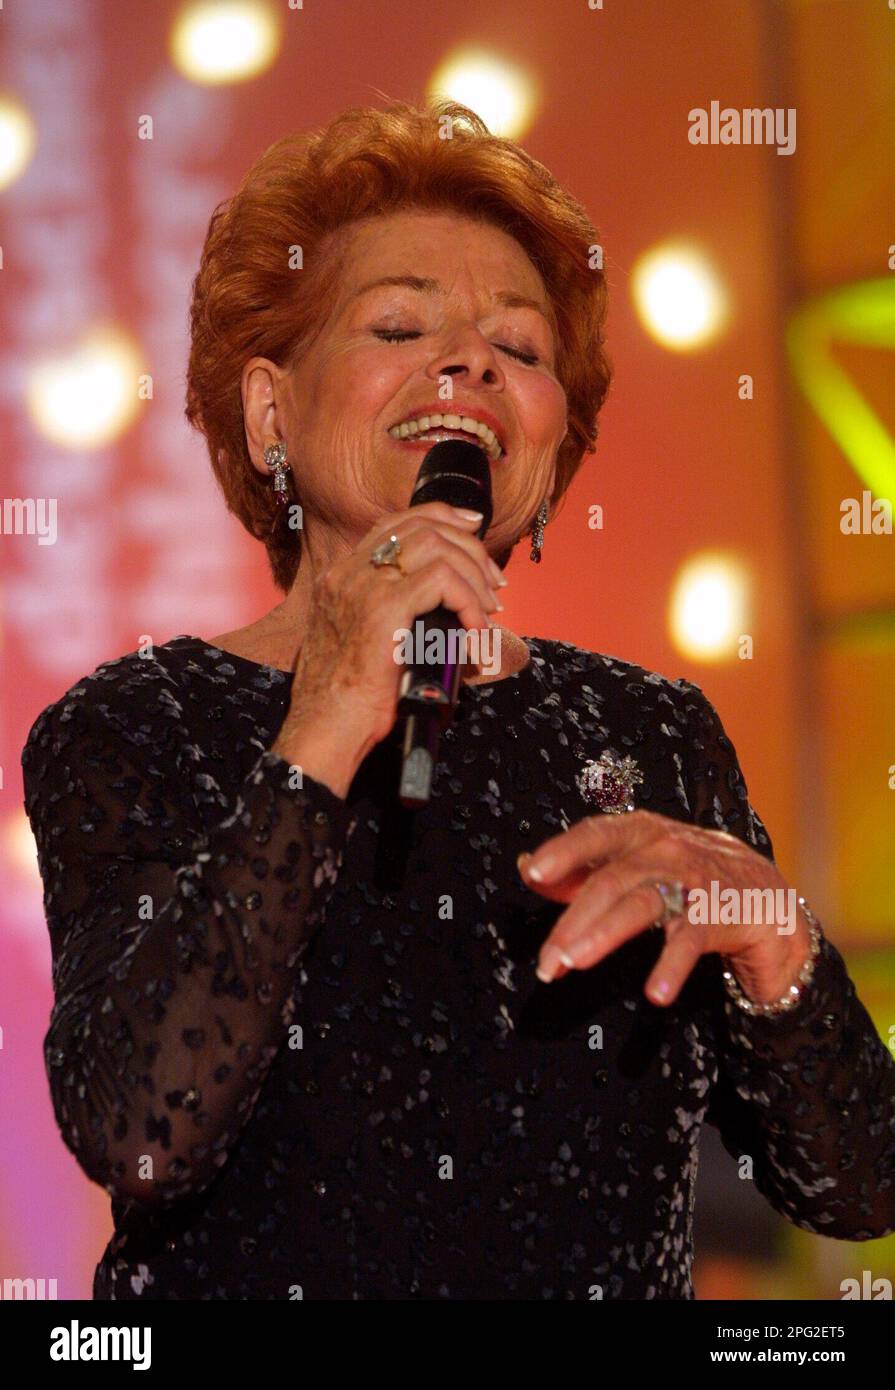 Bremen, Deutschland. 30th May, 2002. 5 years ago, on March 24, 2018, Lys ASSIA, Lys ASSIA, pop singer died. ? Credit: dpa/Alamy Live News Stock Photo